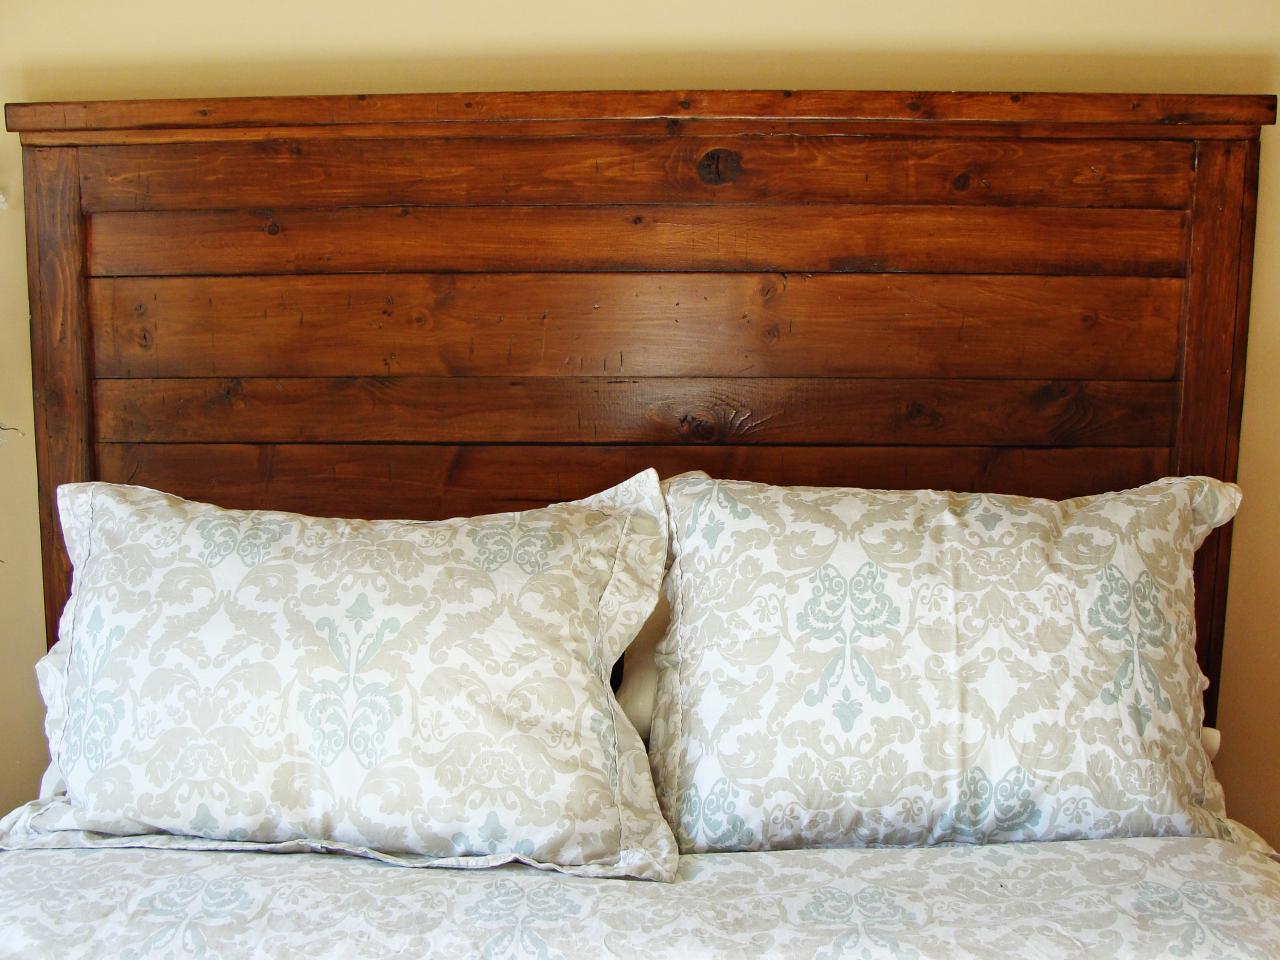 How To Build A Rustic Wood Headboard, How To Make Your Own Headboard